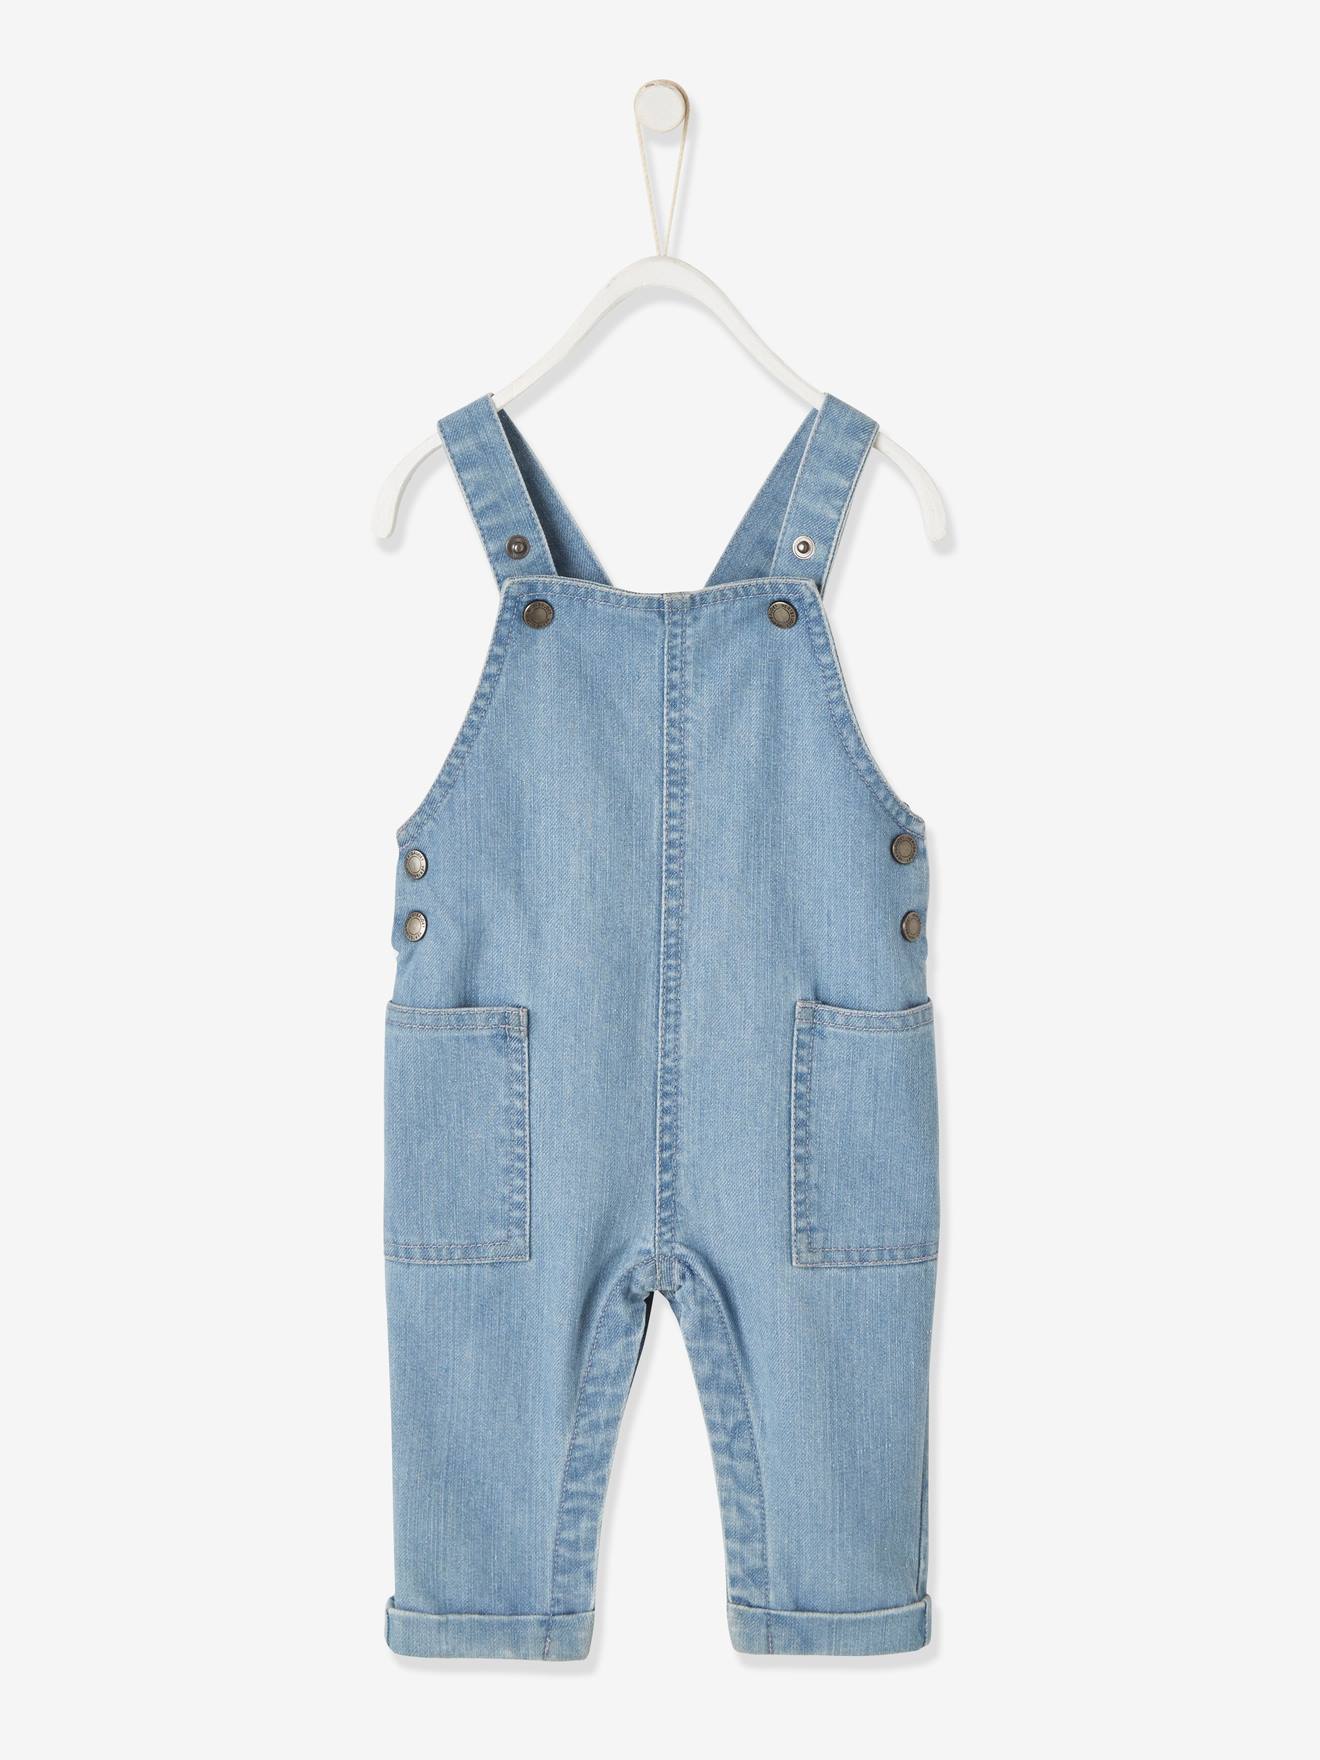 Navy Blue NoName dungaree KIDS FASHION Baby Jumpsuits & Dungarees Jean discount 76% 